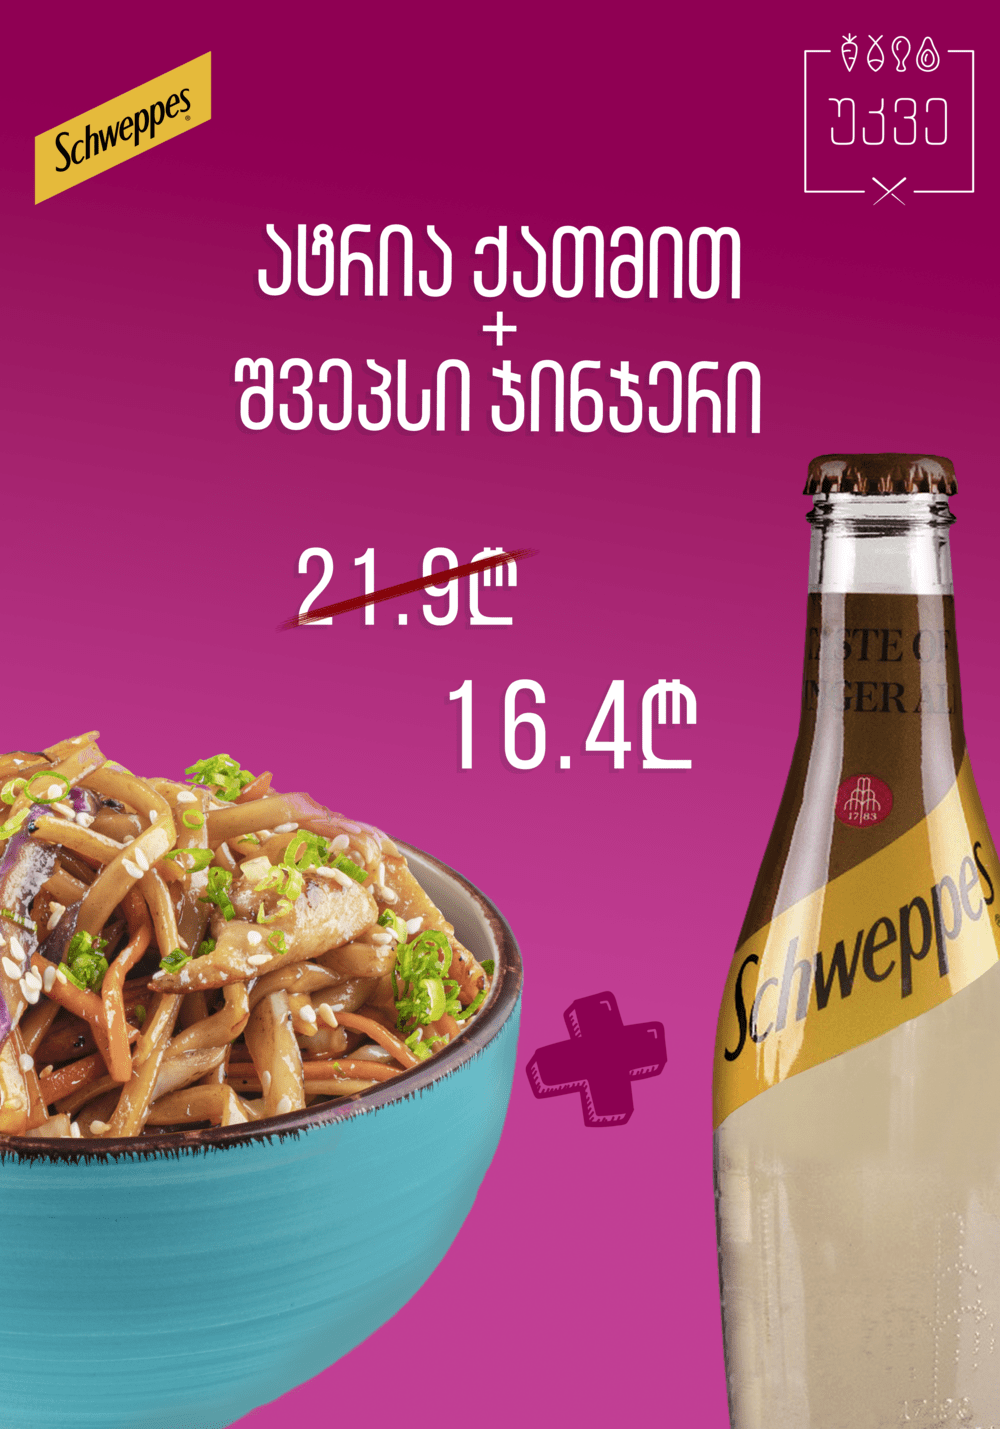 Noodles with chicken+Schweppes